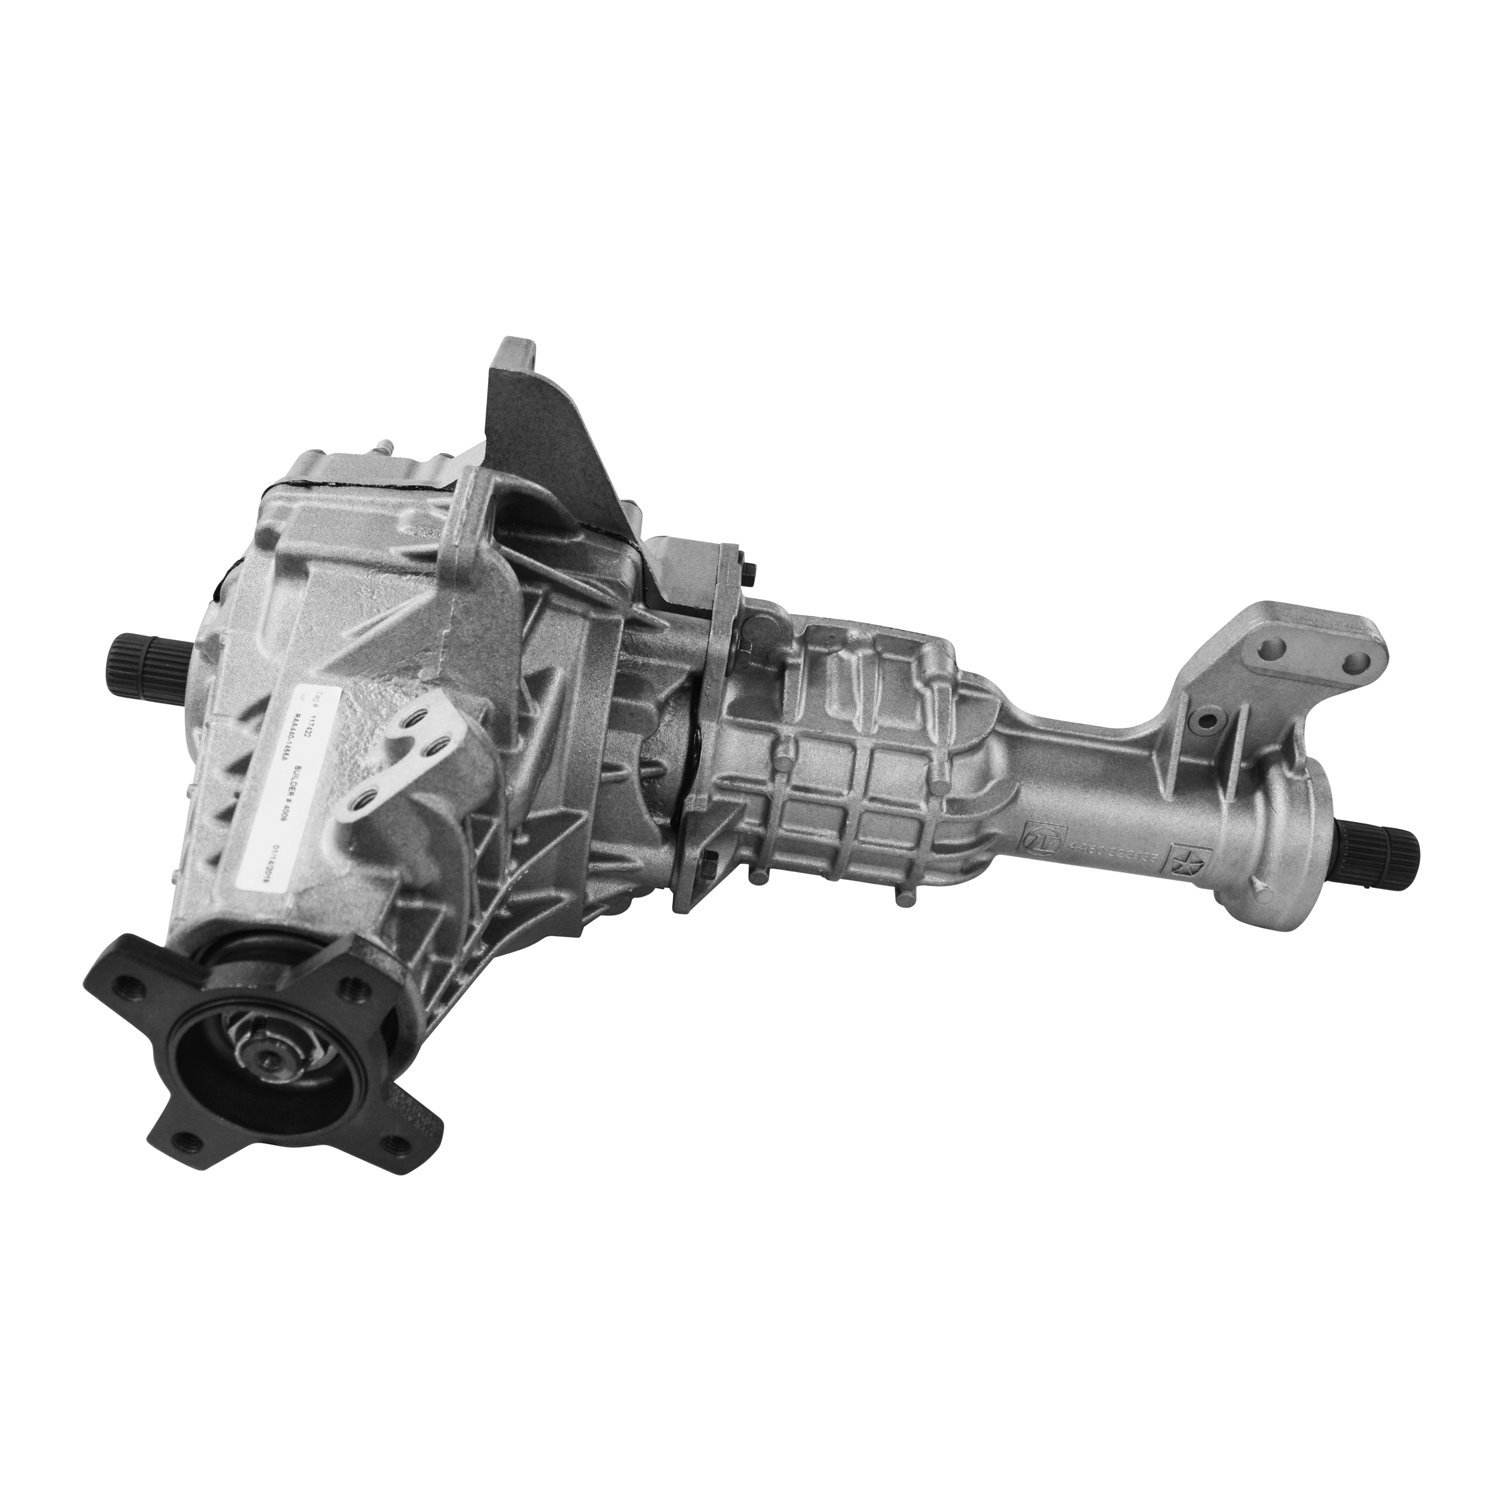 Remanufactured Front Axle Assy, C205F, 8 In. Ring Gear, 2012 Ram 1500, 3.55 Ratio